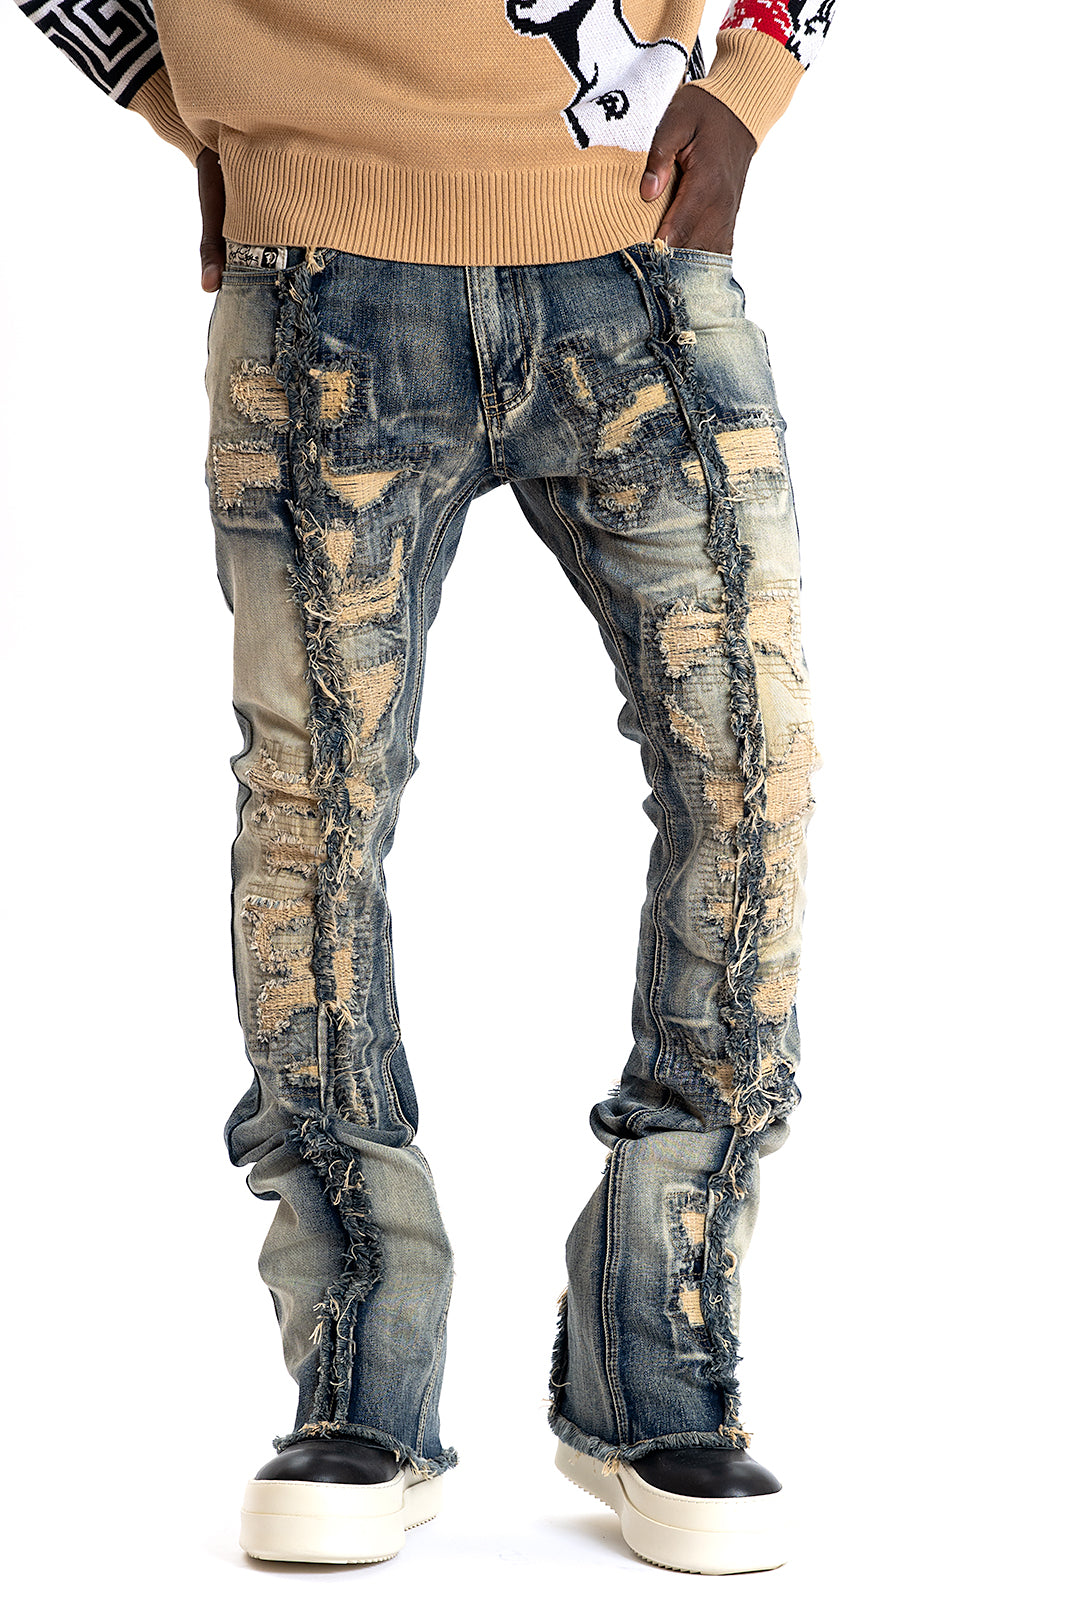 F1774 Cashay Prime Stacked Jeans - Vintage